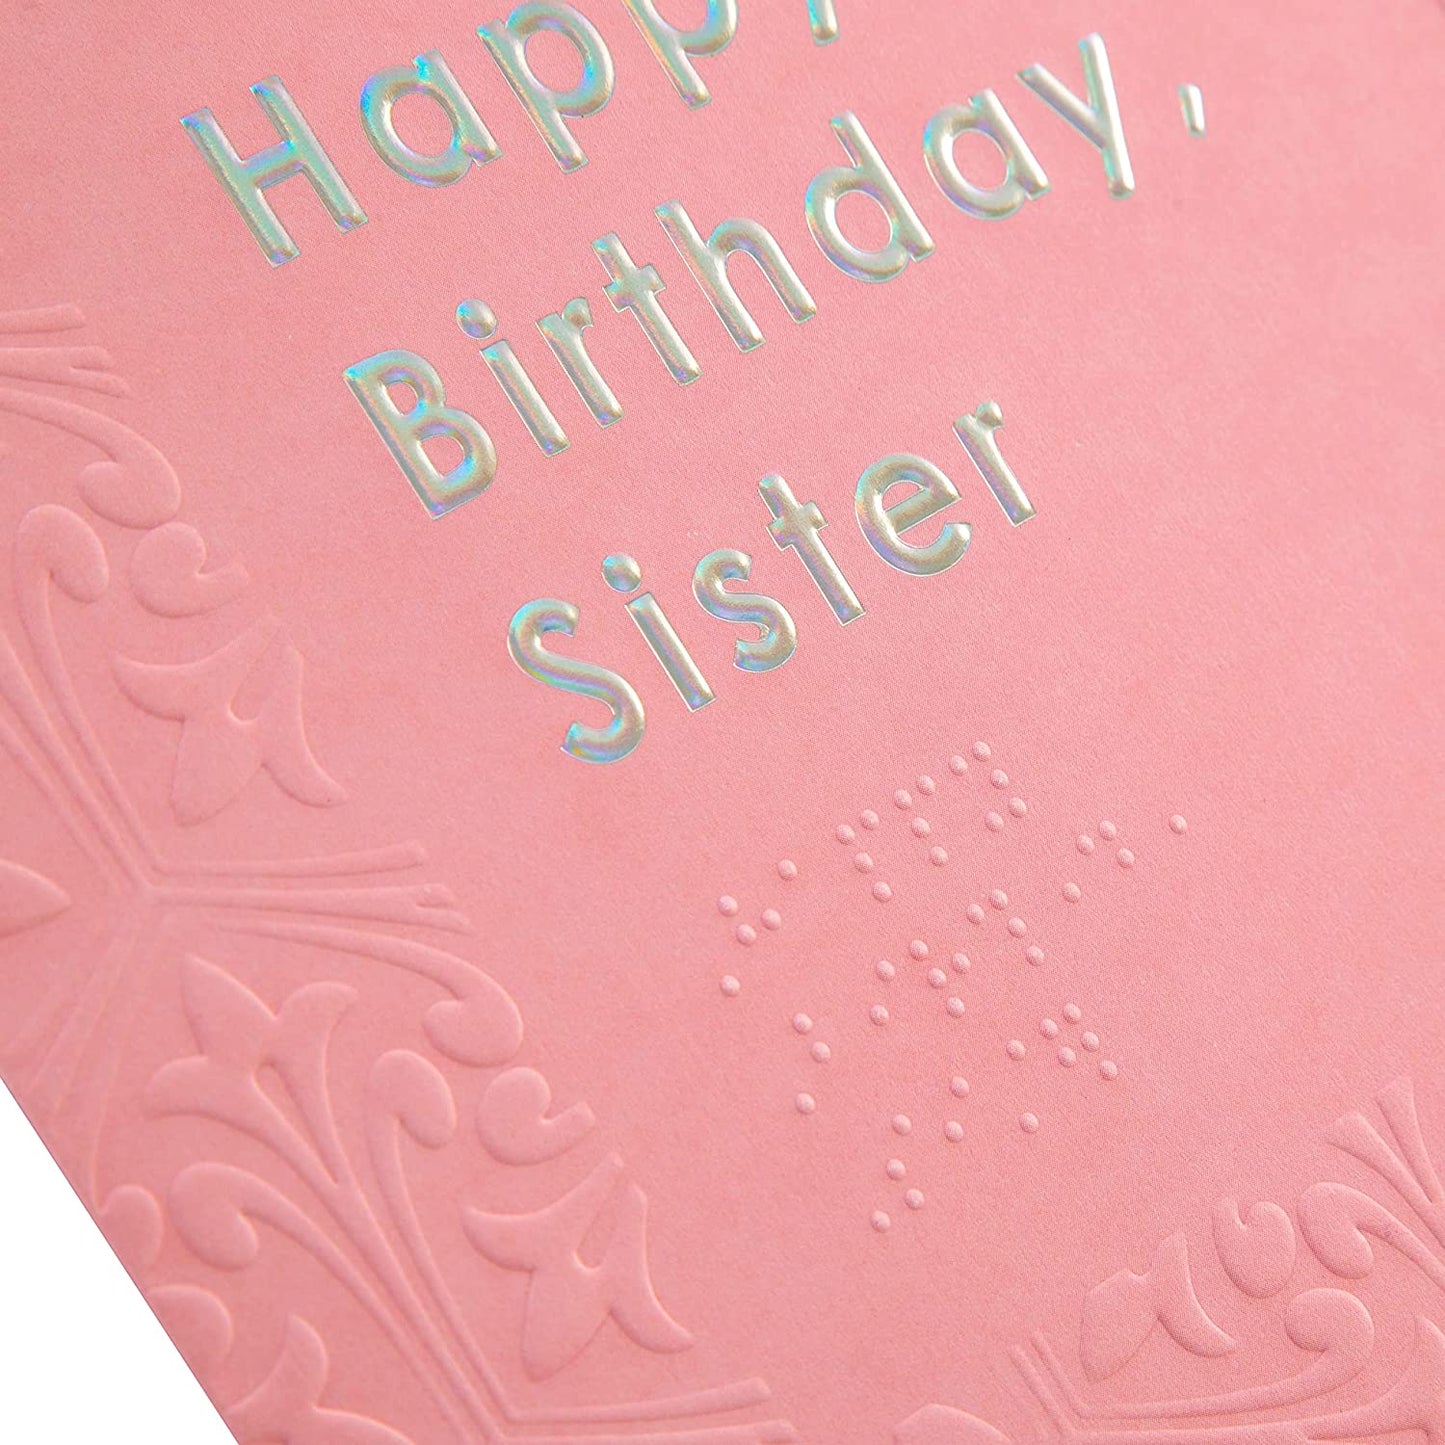 Contemporary Patterned Design Braille Birthday Card for Sister